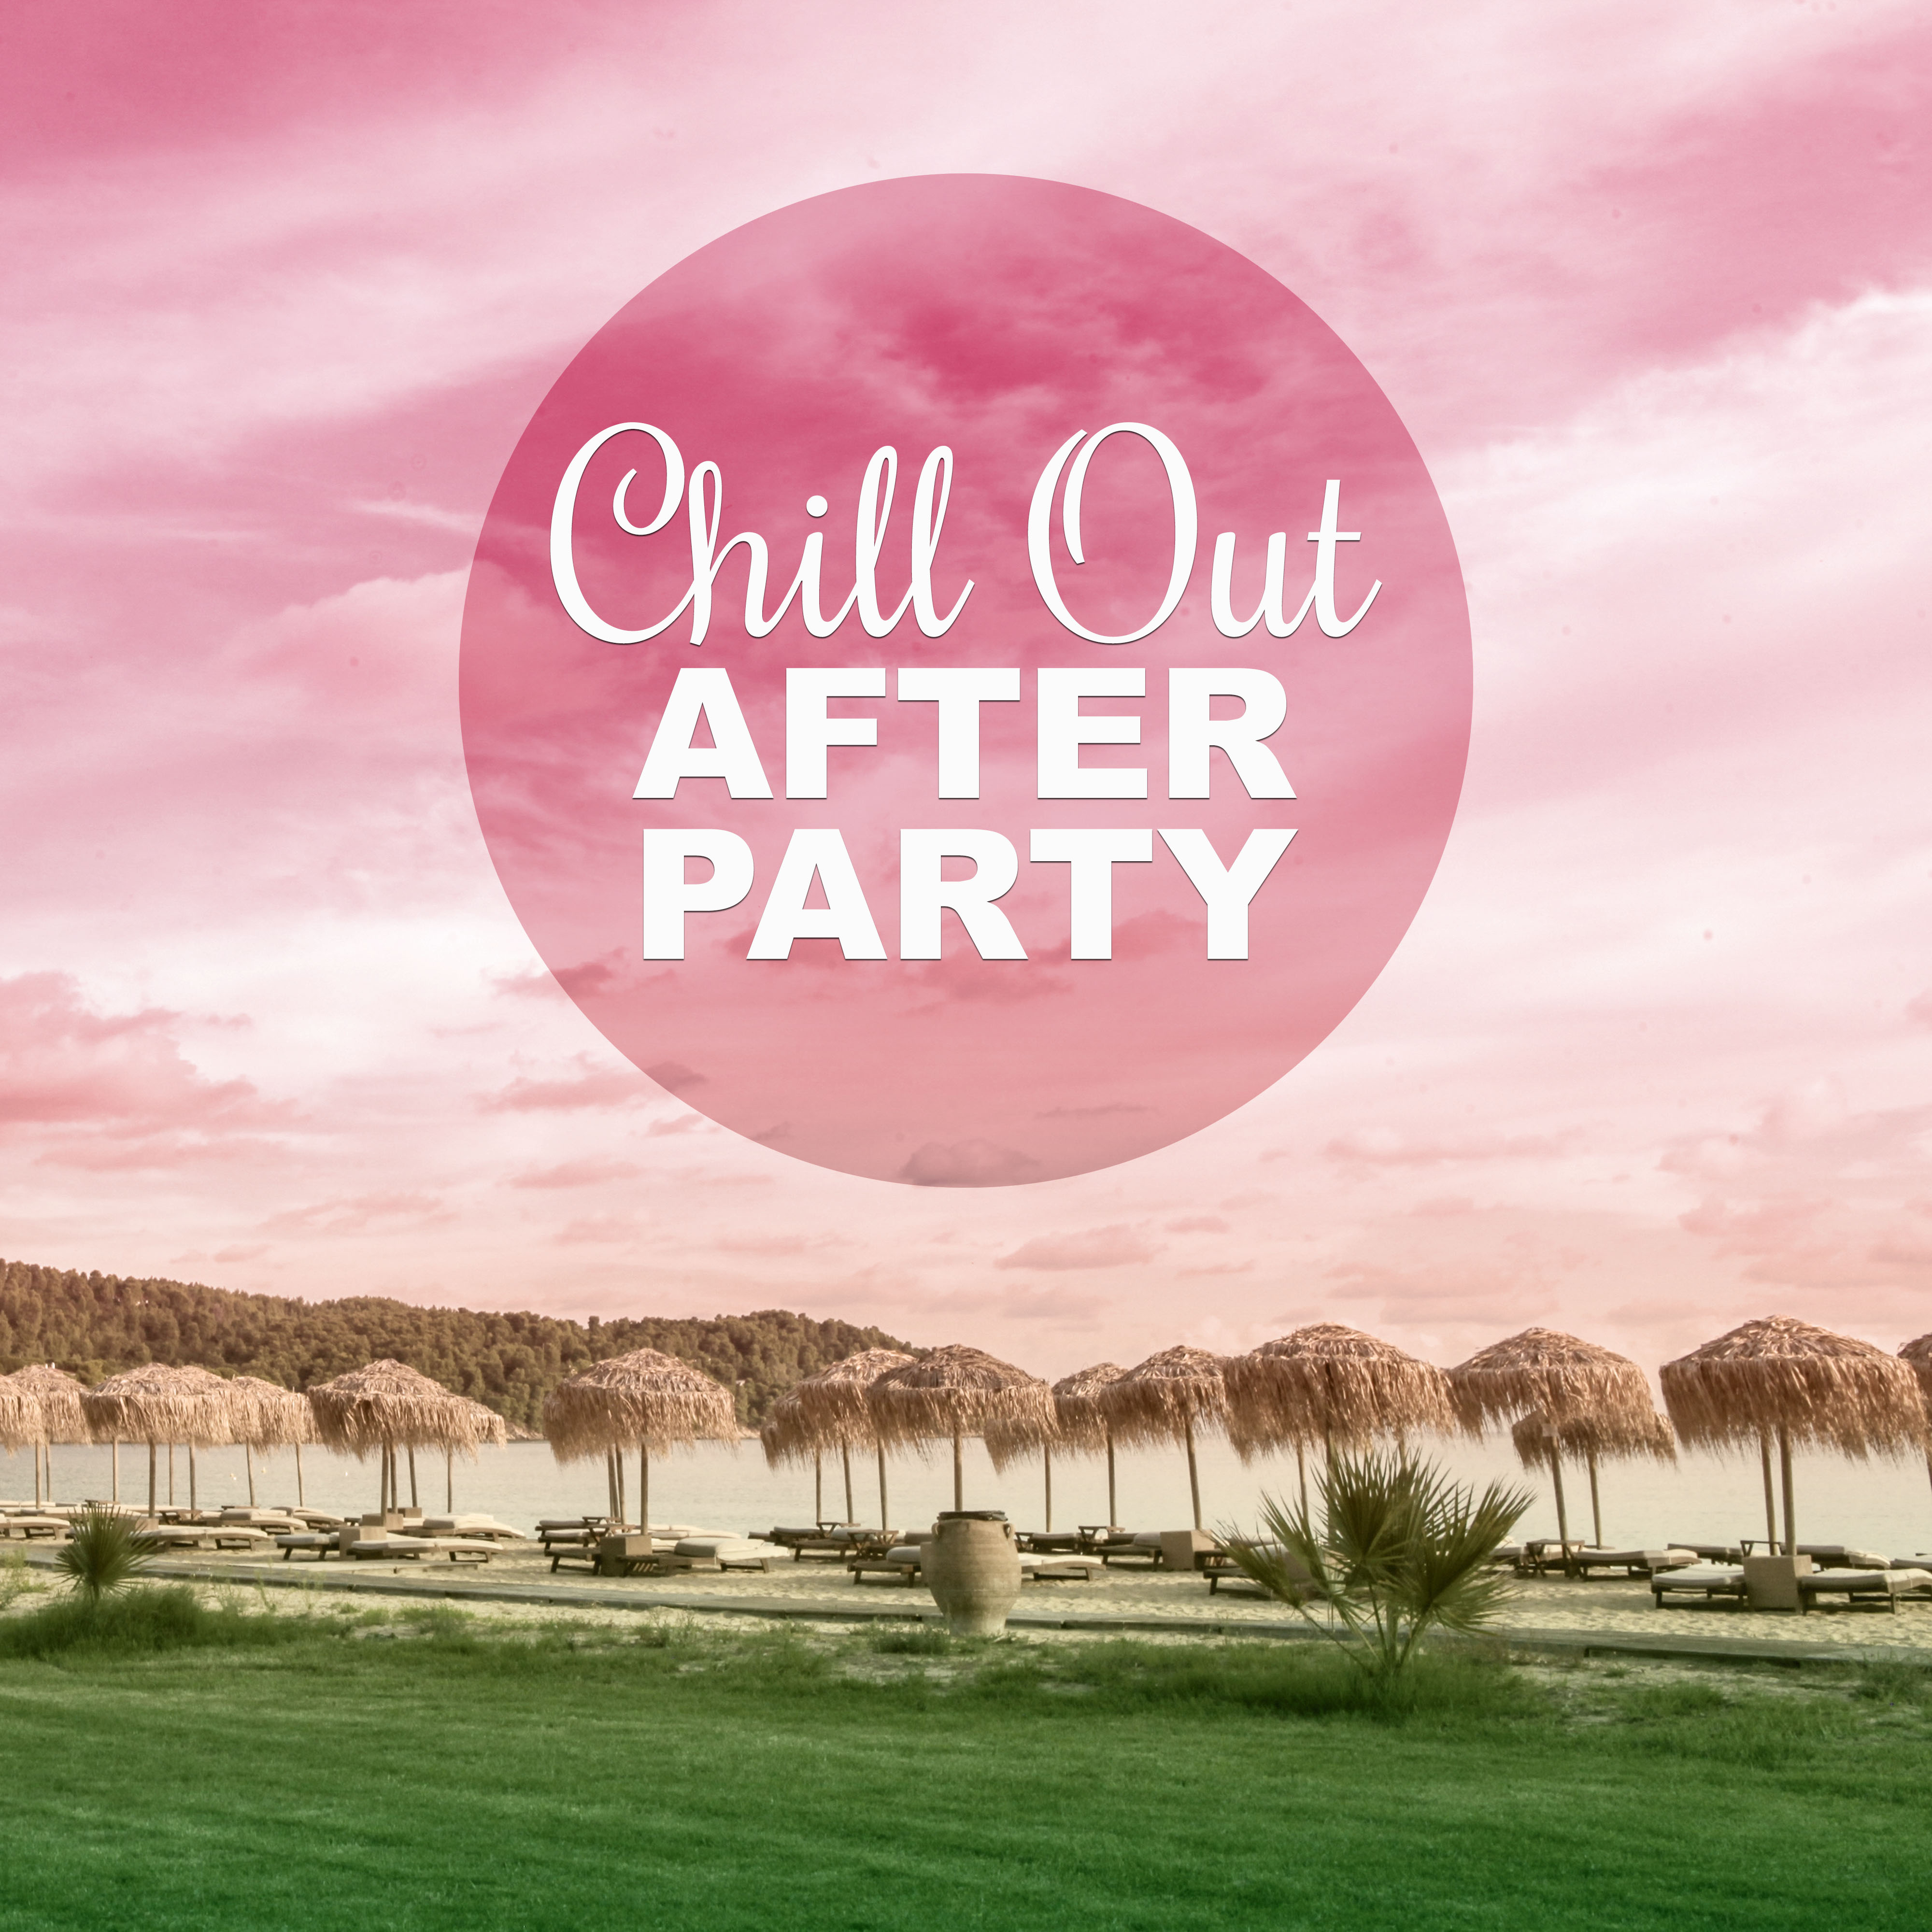 Chill Out After Party – Ibiza Beach Party and Chill Out Music for Relaxation